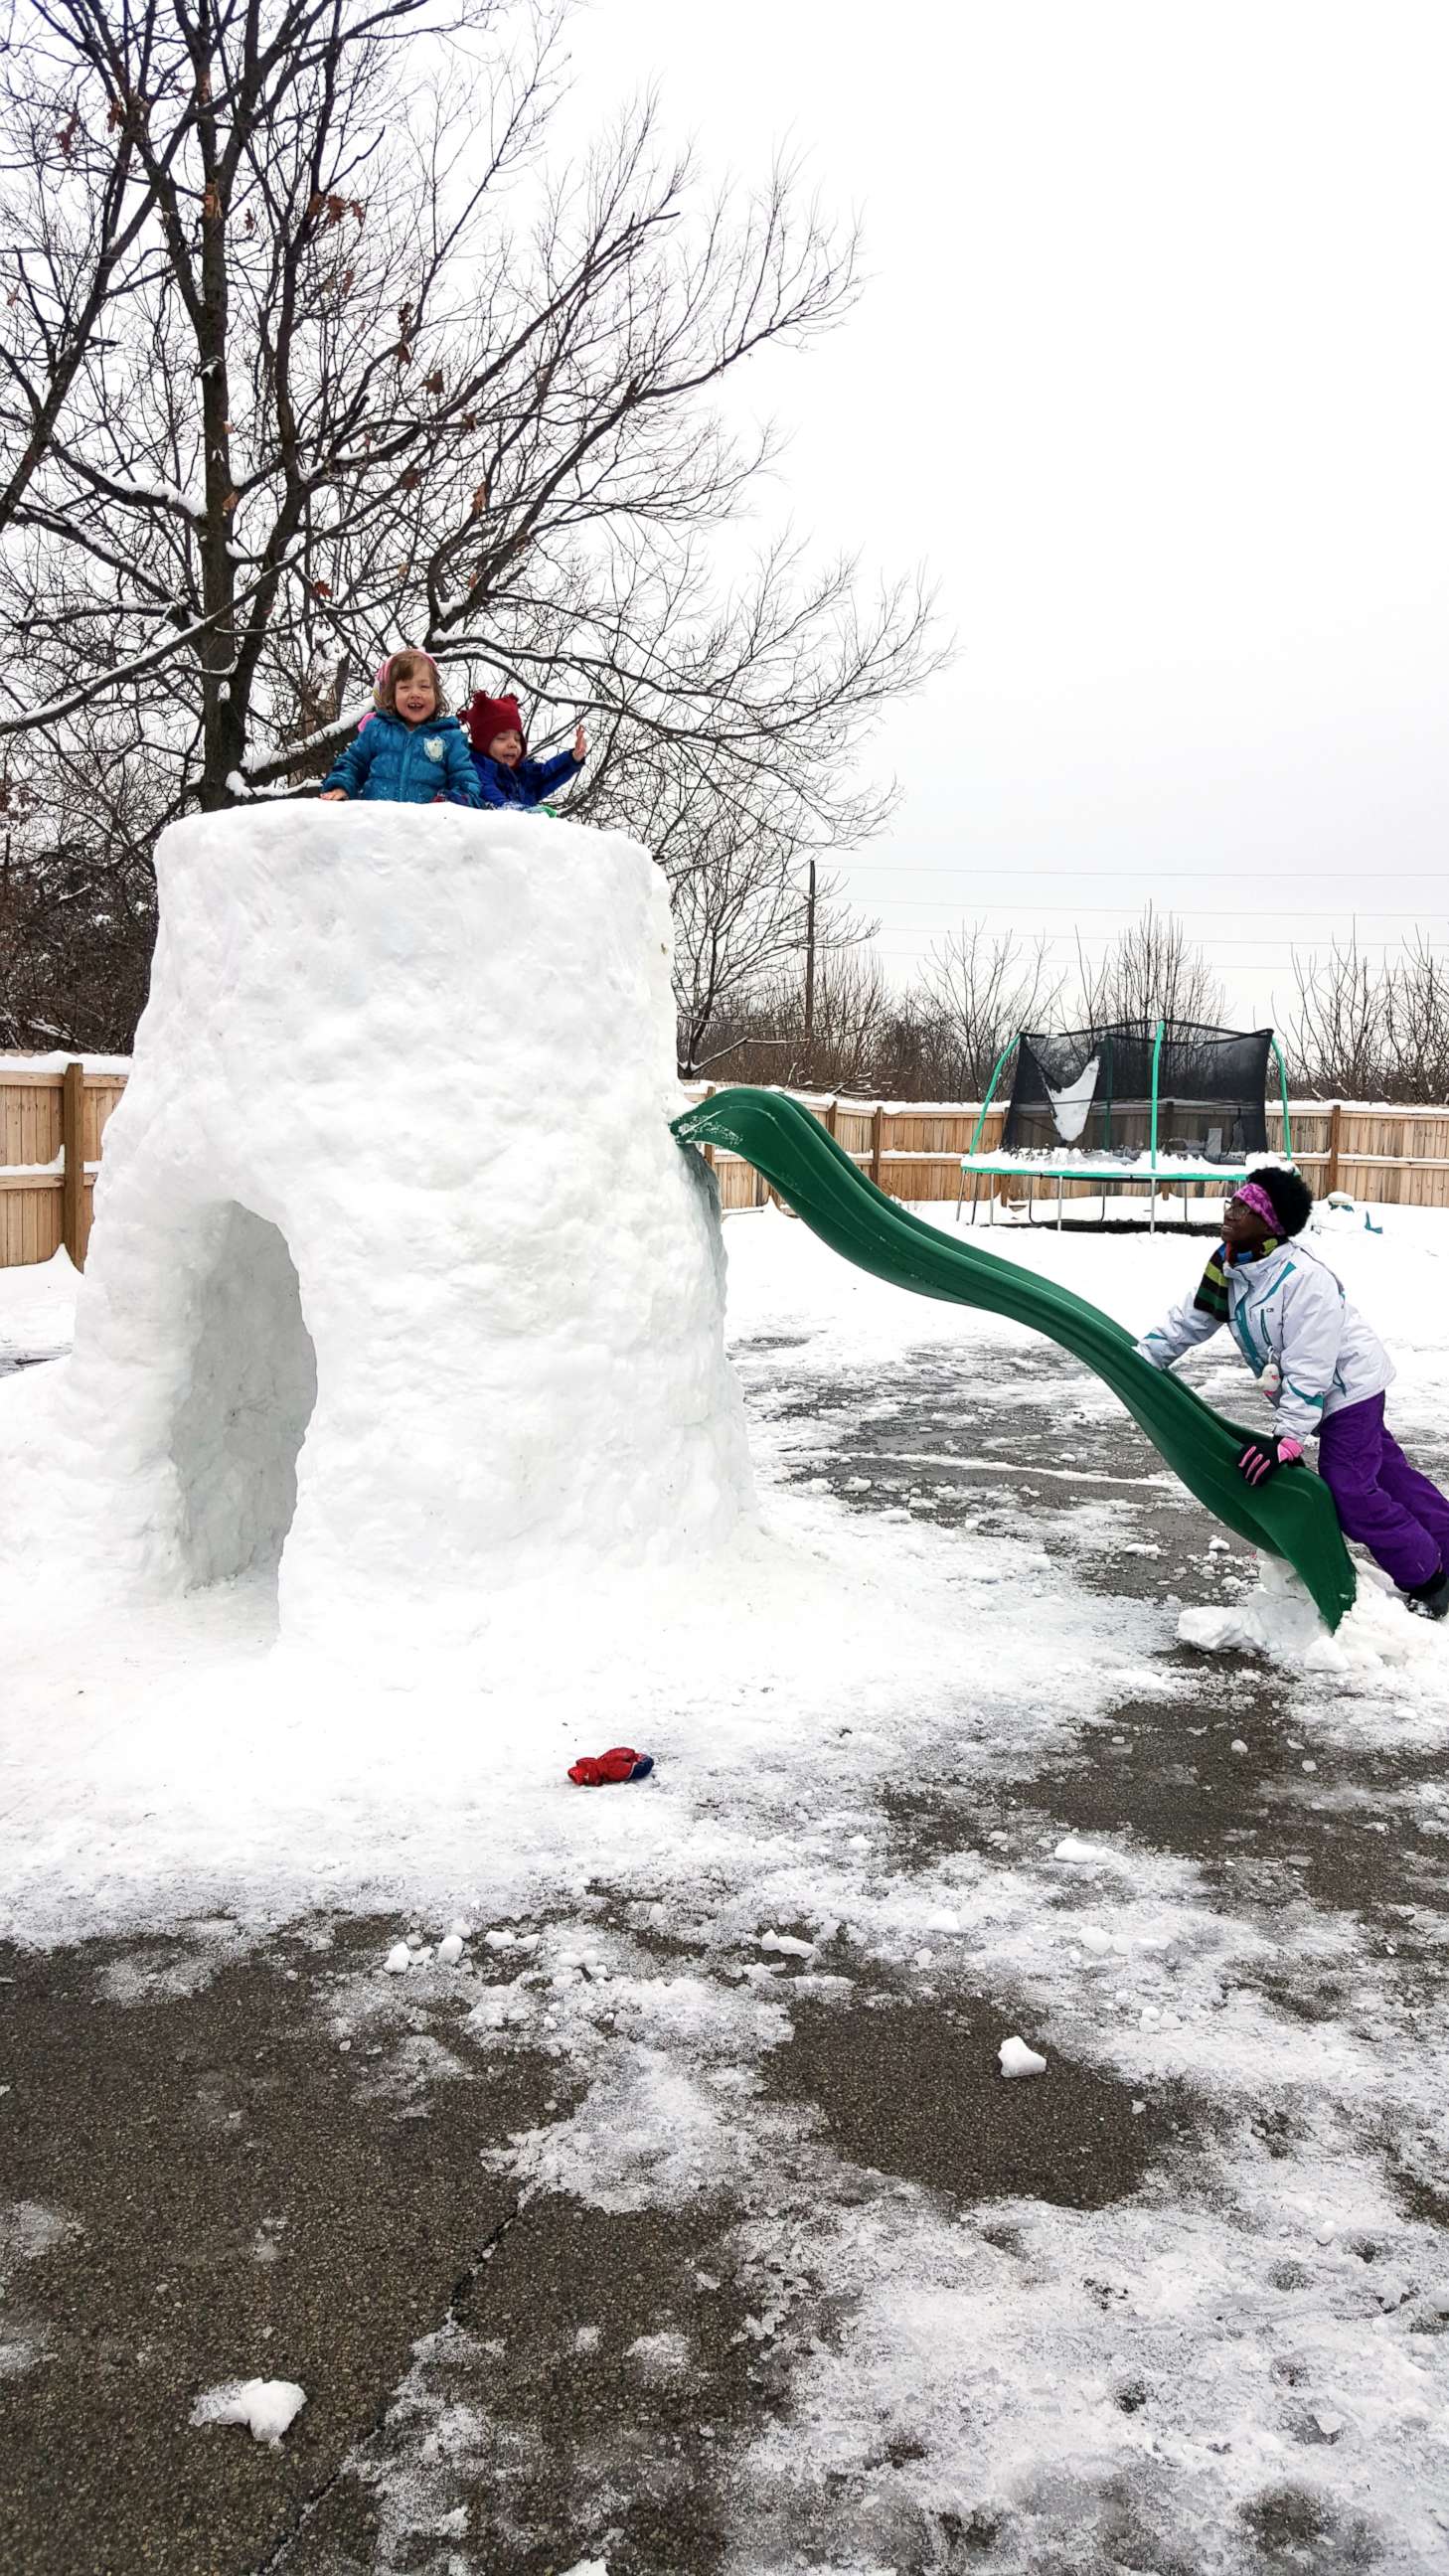 PHOTO: Gregg Eichhorn added a slide to the snow fort he built in the family's backyard.